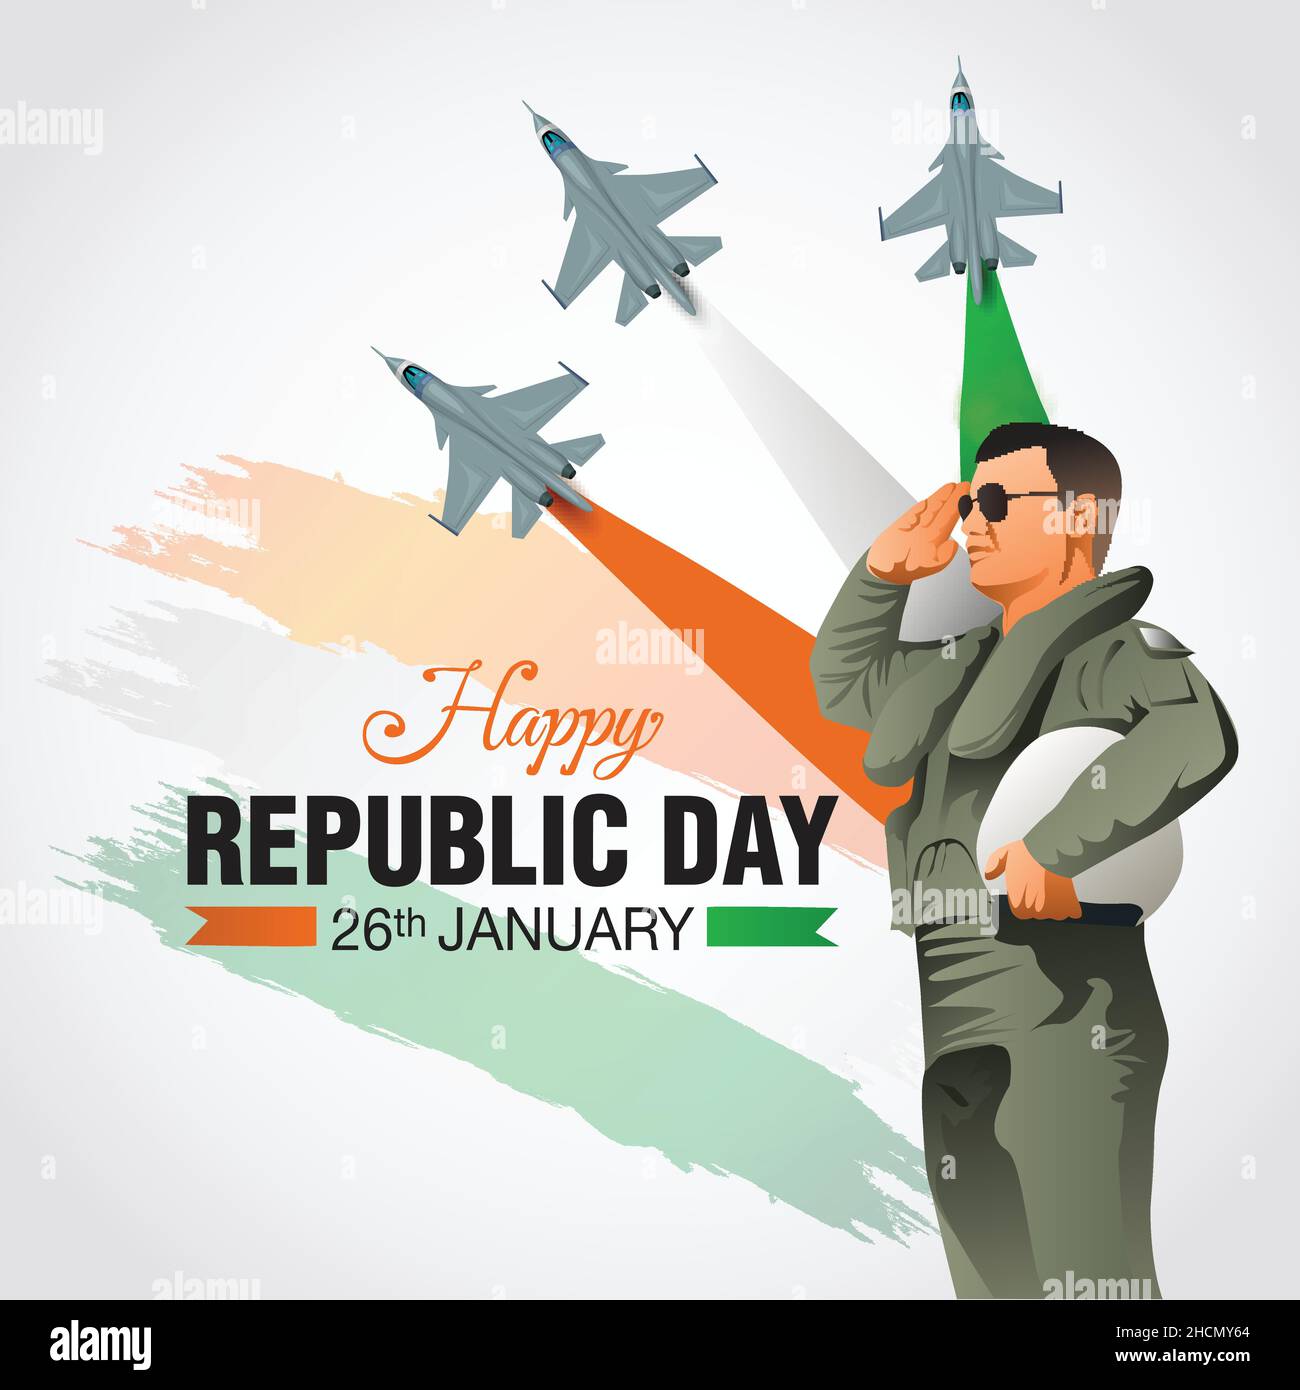 Happy Republic Day India concept with vector illustration of fighter jets and Indian flag colors, with white background. Stock Vector